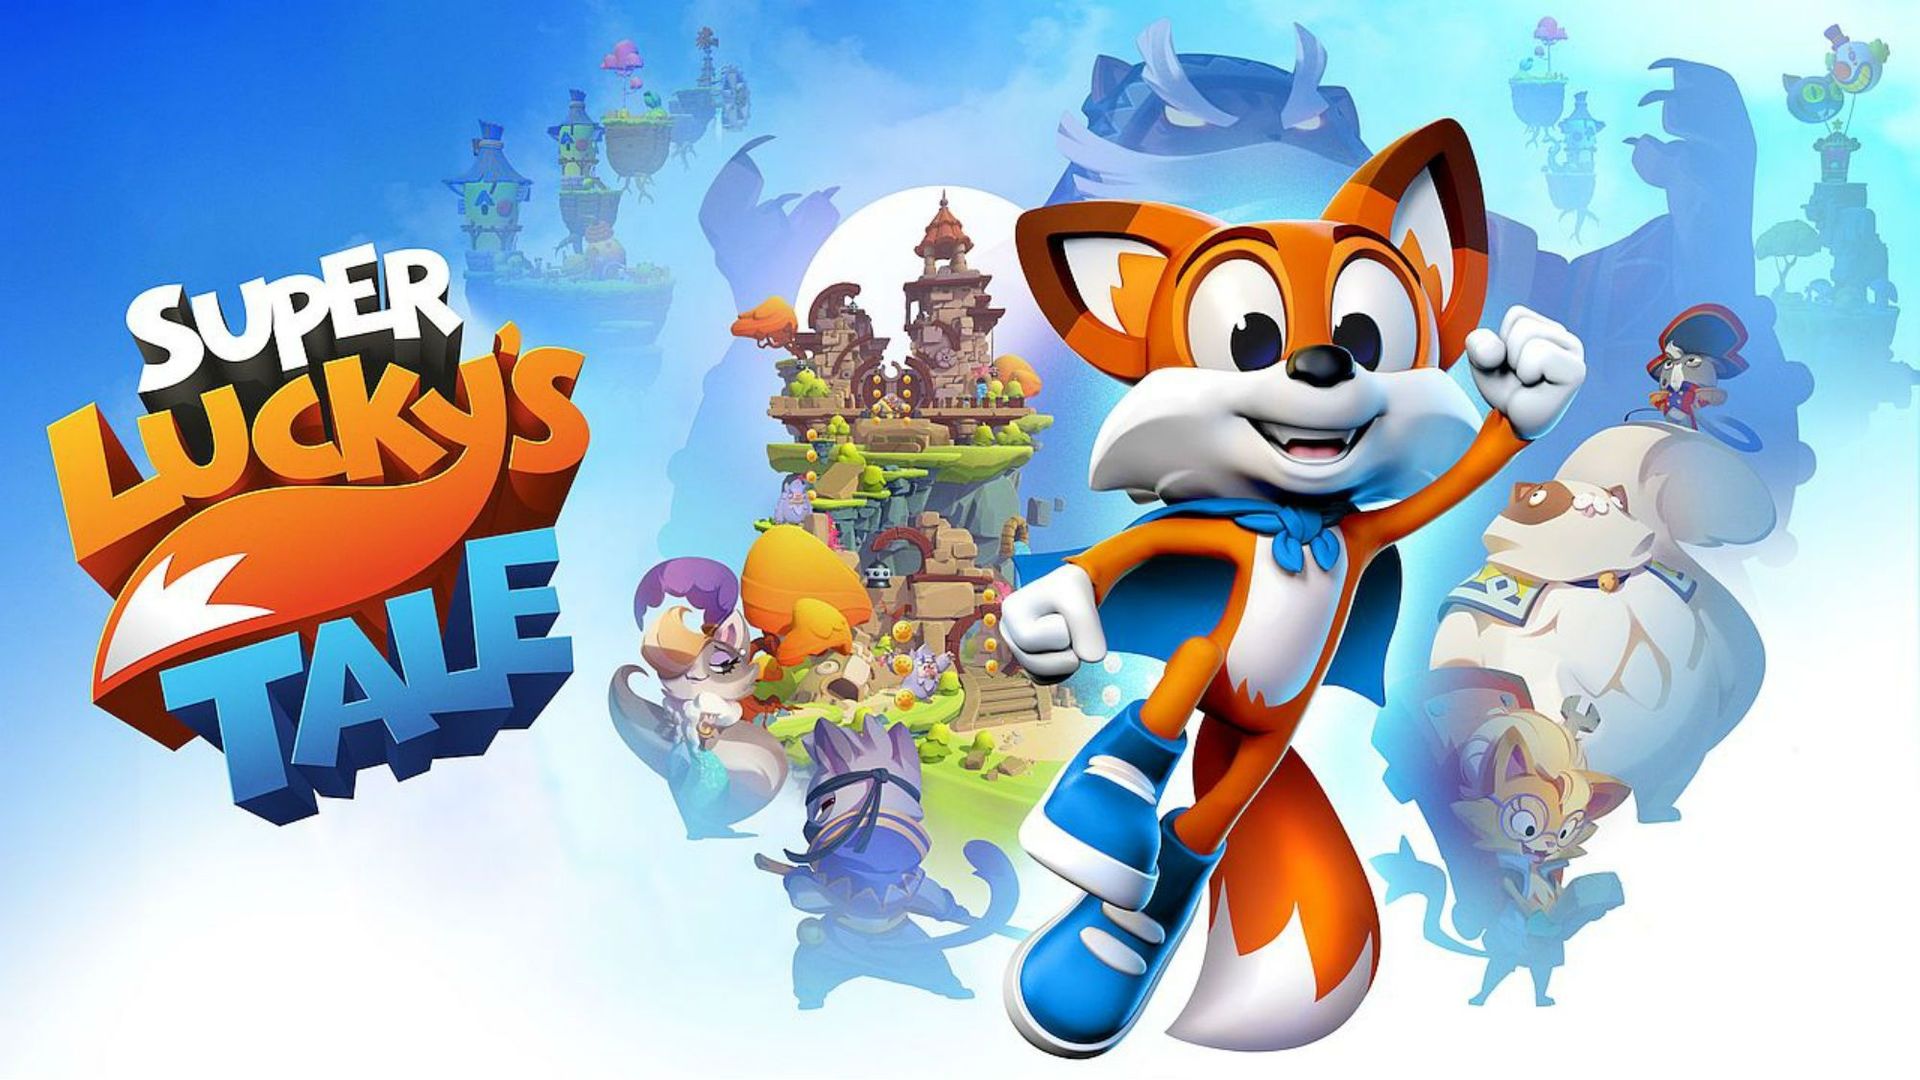 Sorties jeux vidéo : "Sonic Forces", "Football Manager 2018", "Need for Speed: Payback"